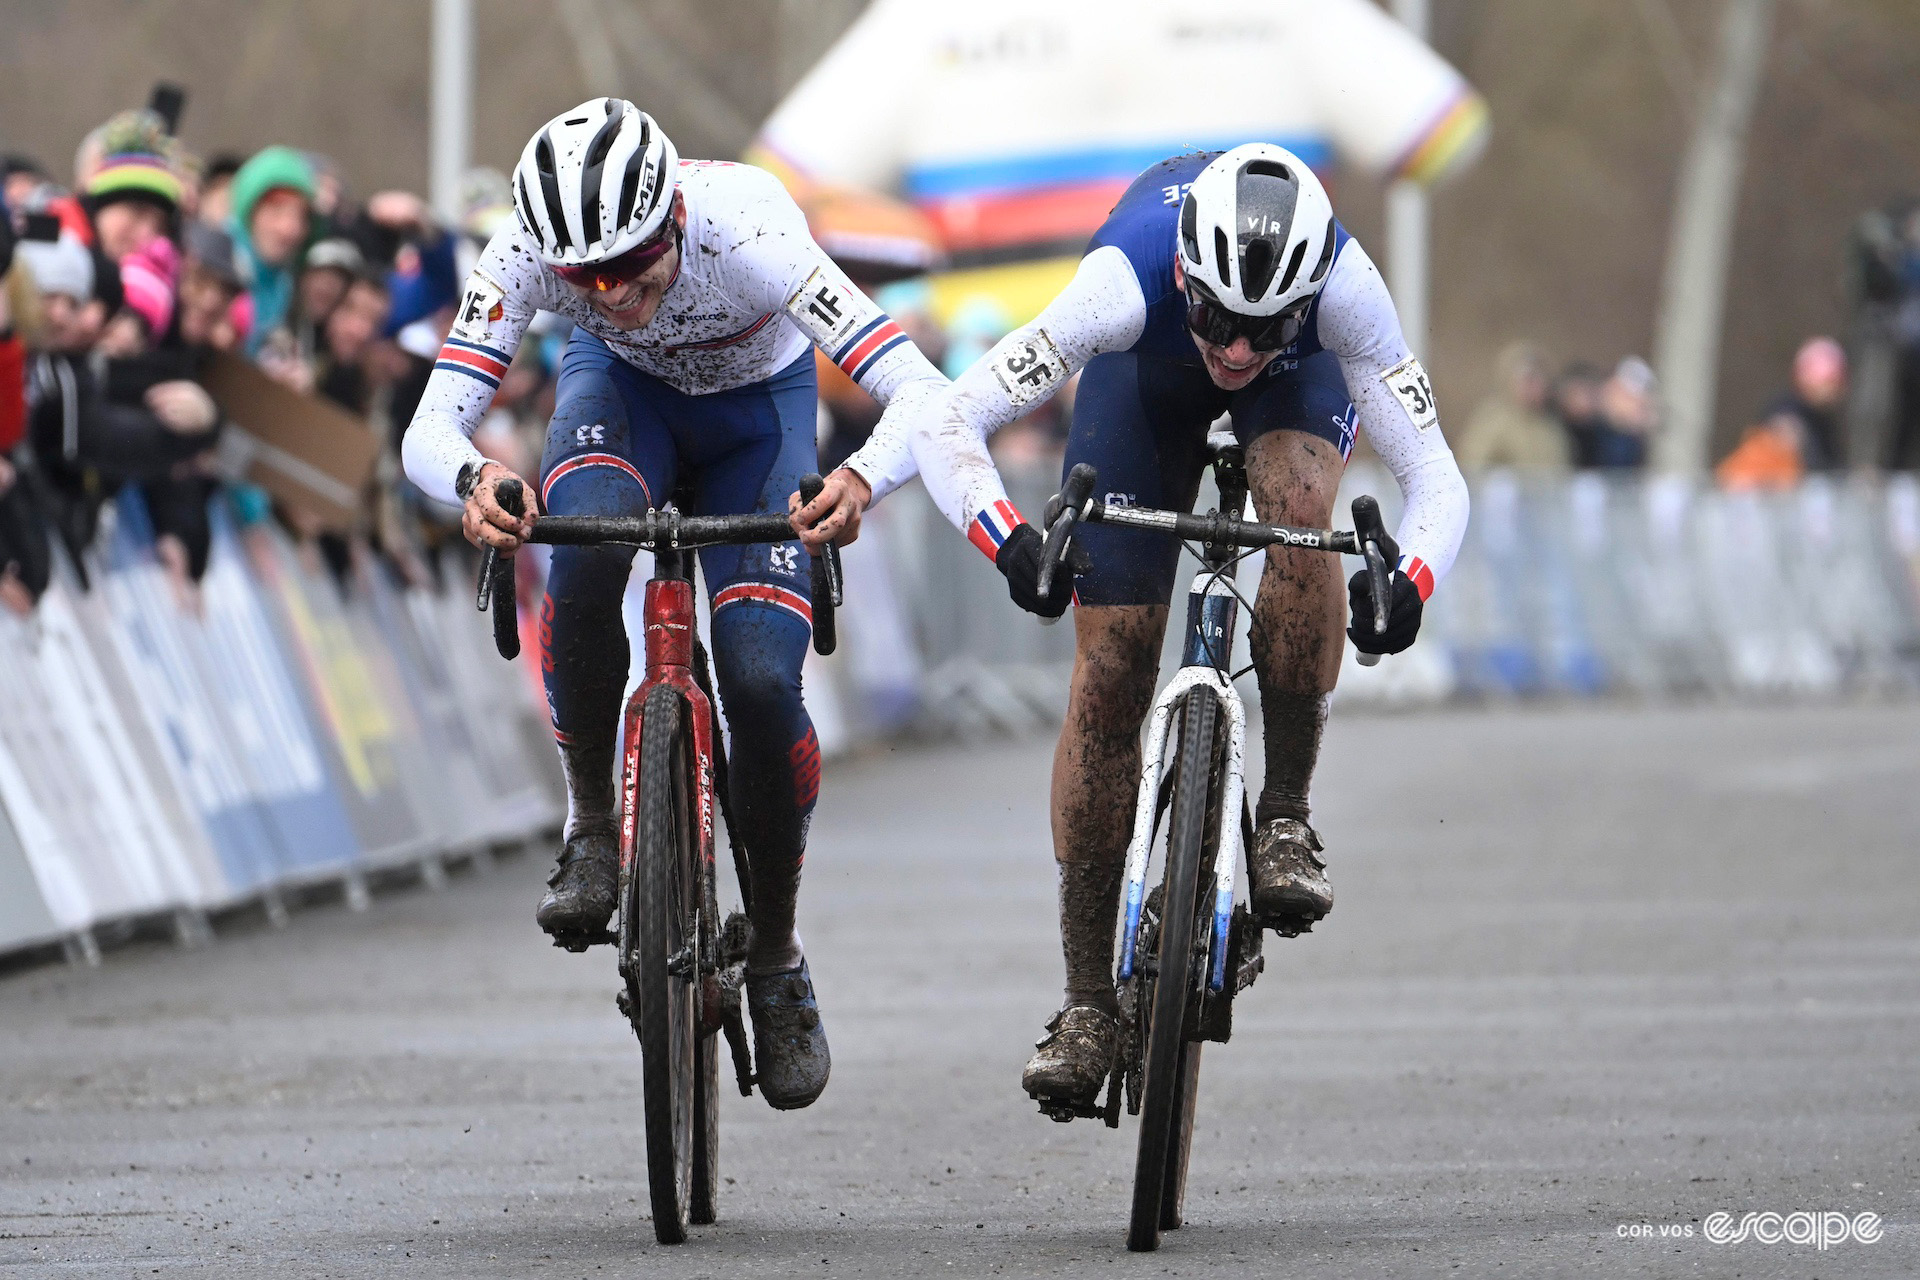 British rider Cameron Mason pictured sprinting against the young Frenchman Aubin Spaufel whose superior sprint won France the team relay at the UCI Cyclo-Cross World Championships in Tábor.